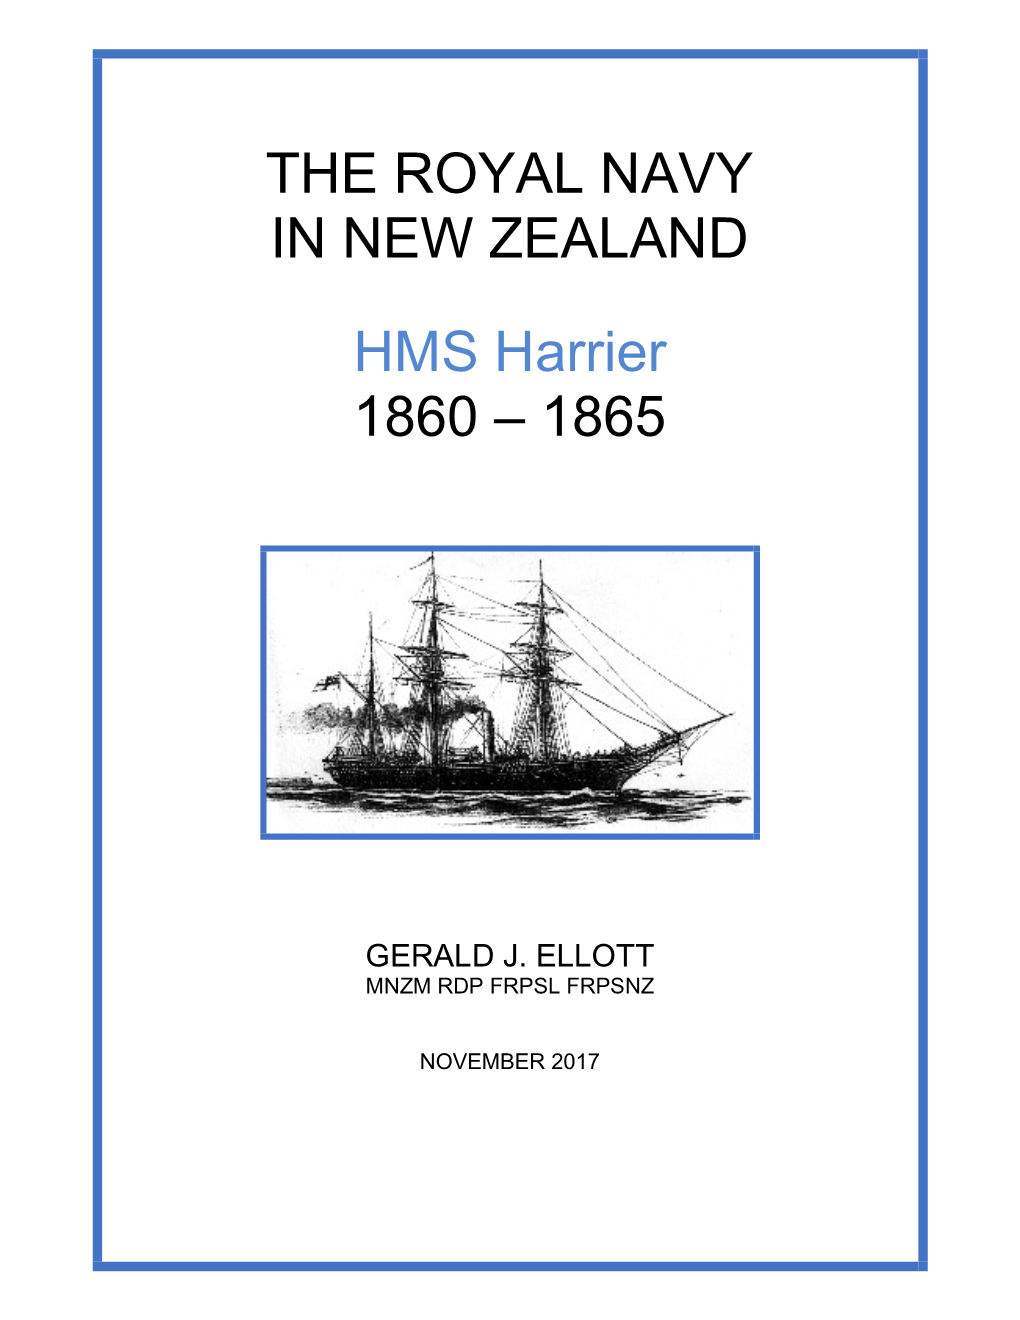 THE ROYAL NAVY in NEW ZEALAND HMS Harrier 1860 – 1865